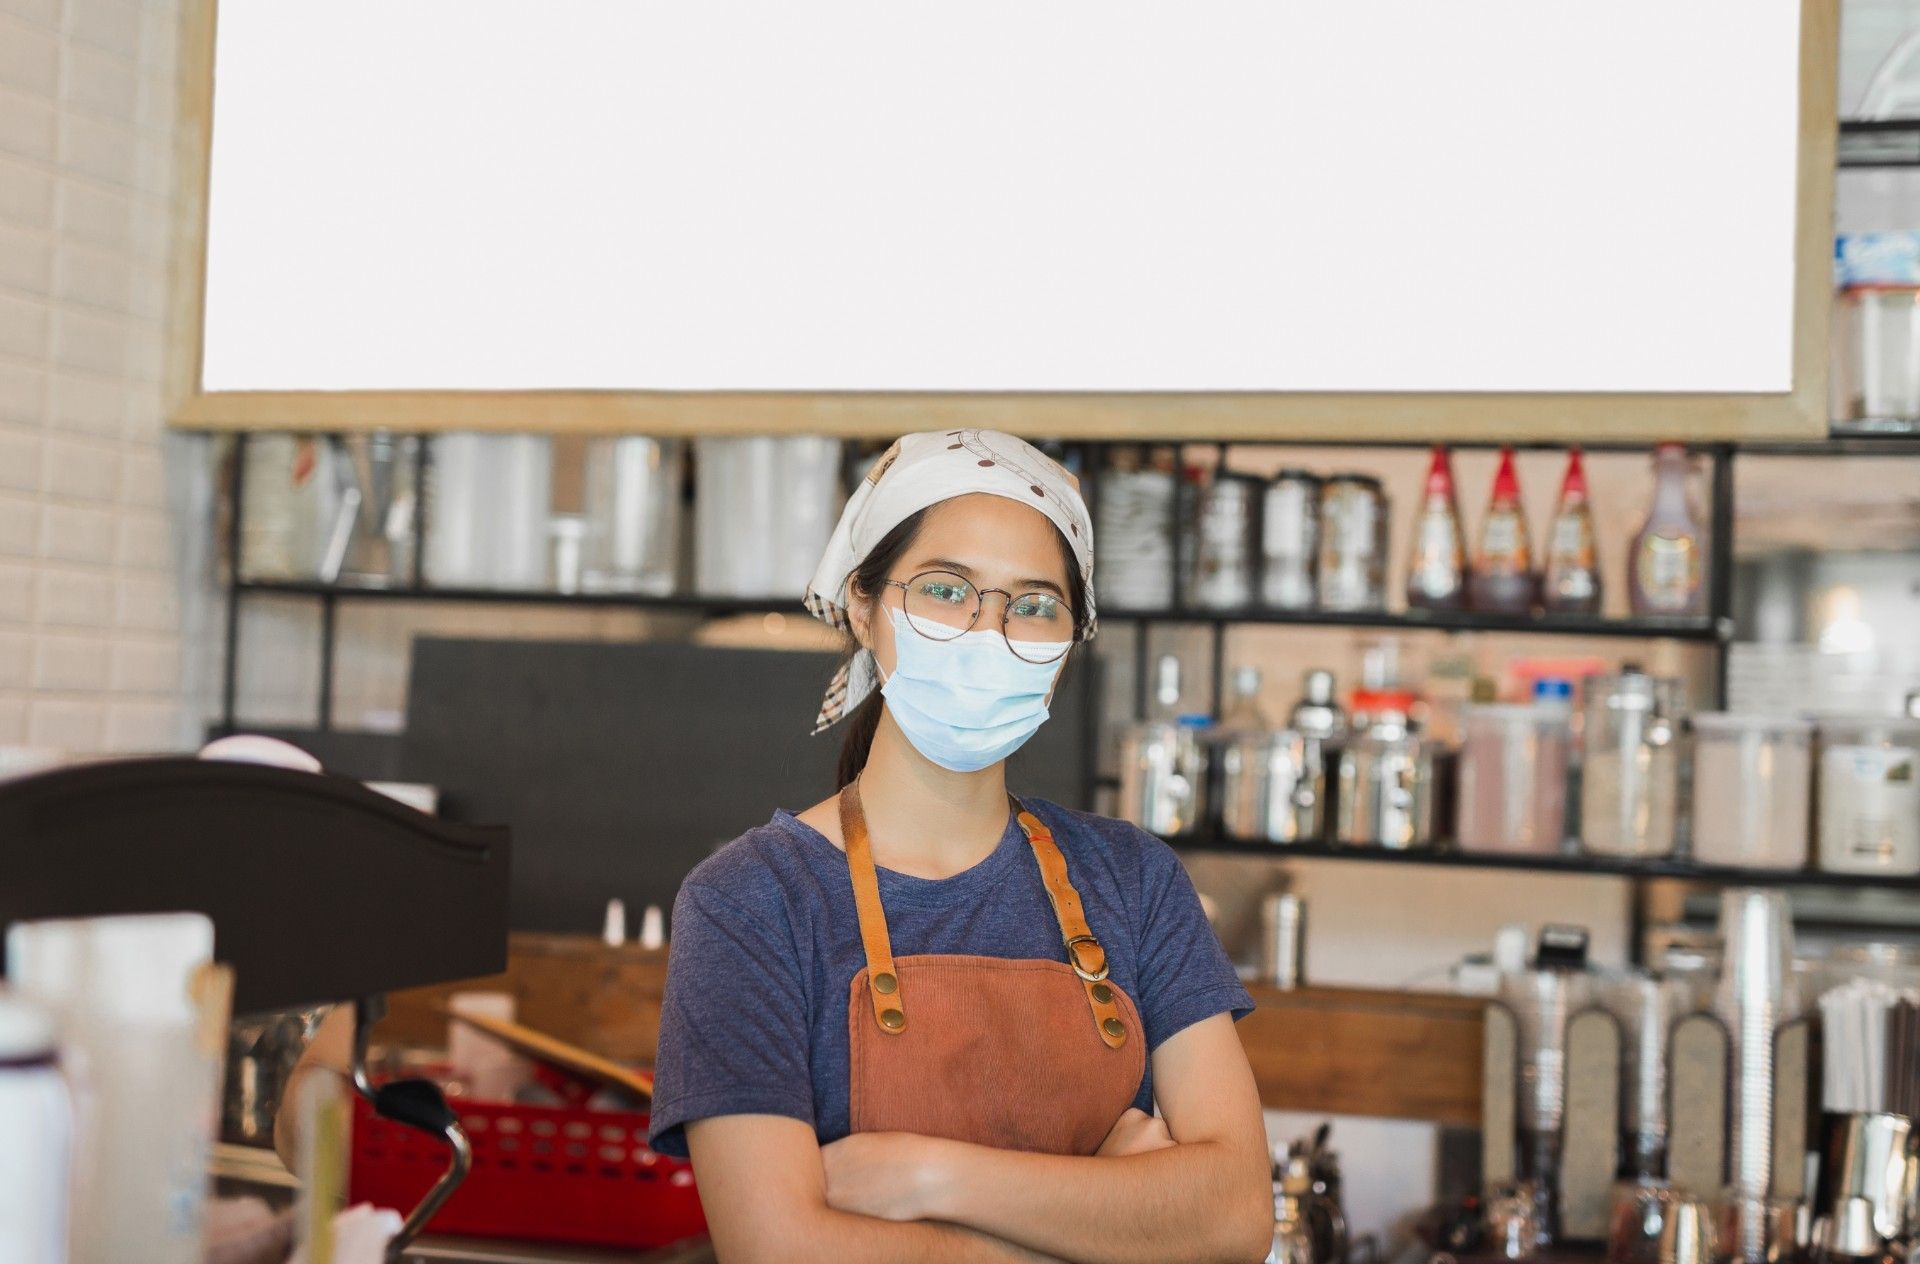 A female employee wearing a face mask and apron stands in a cafe - jobs scheme